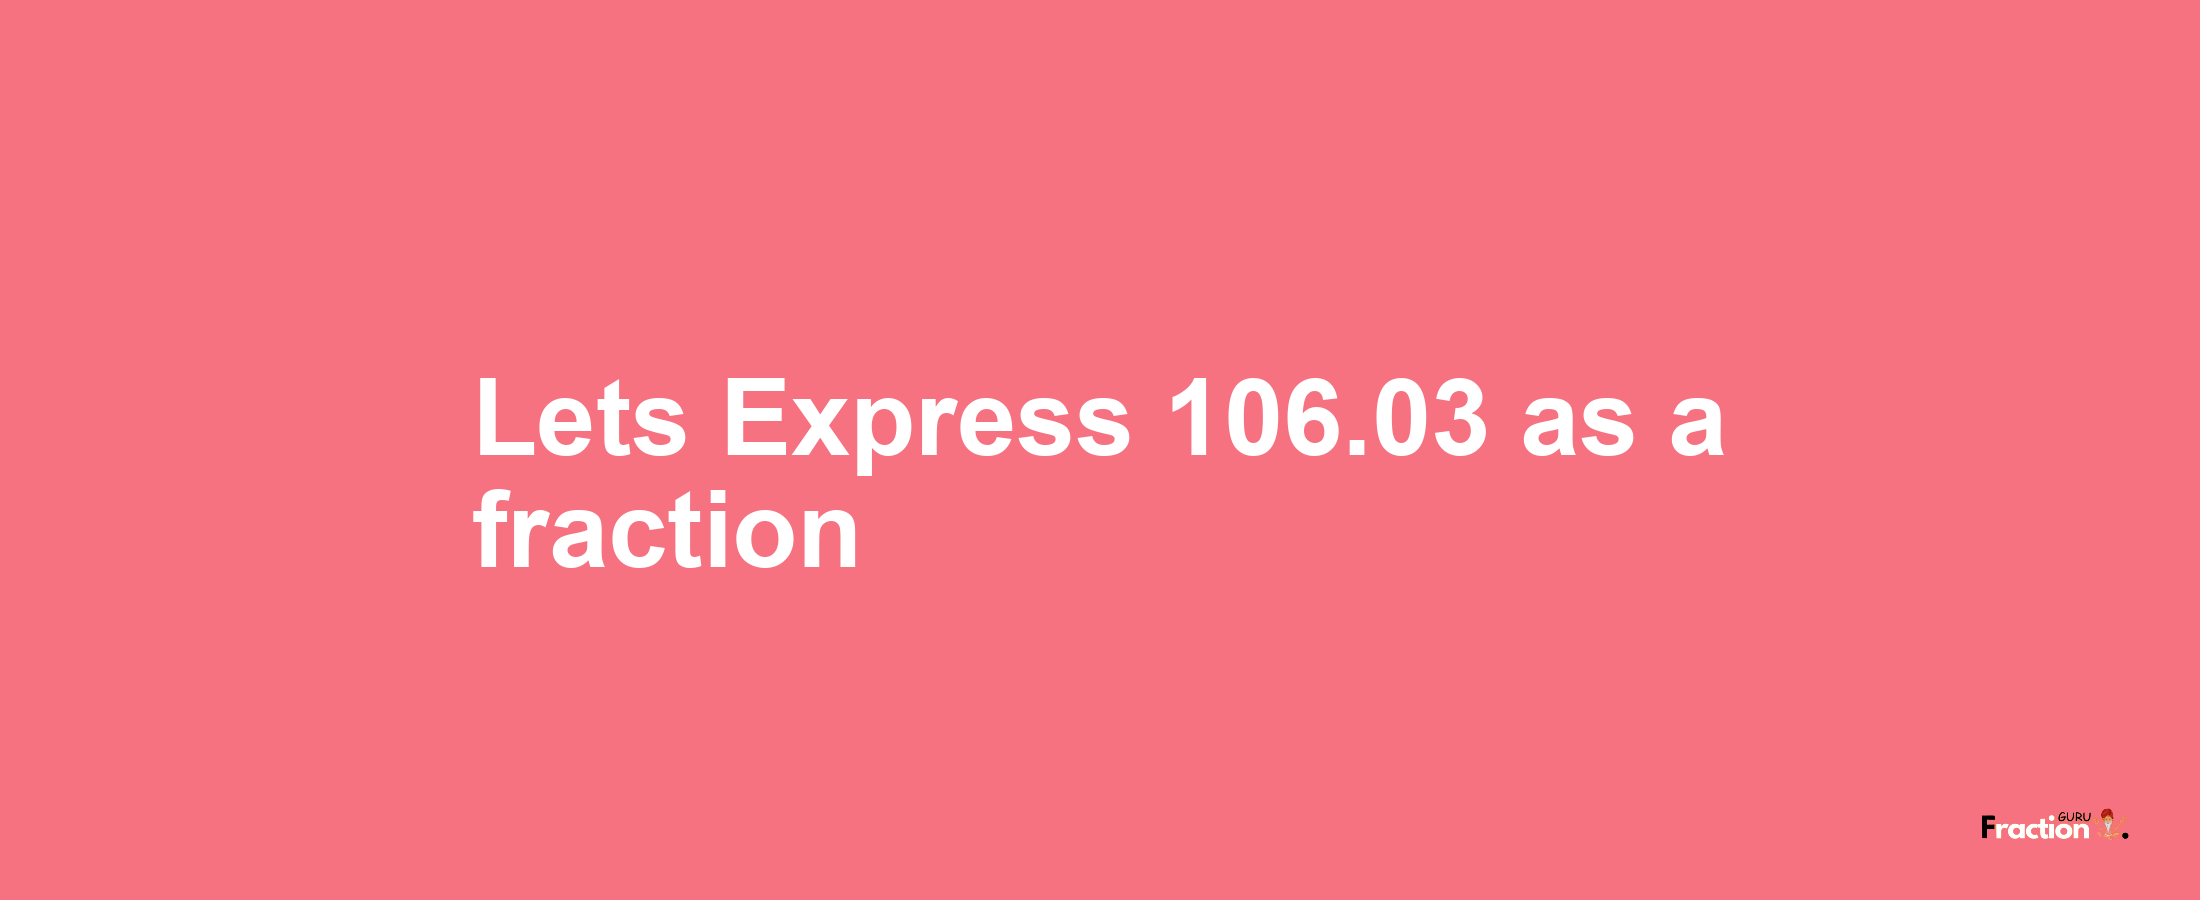 Lets Express 106.03 as afraction